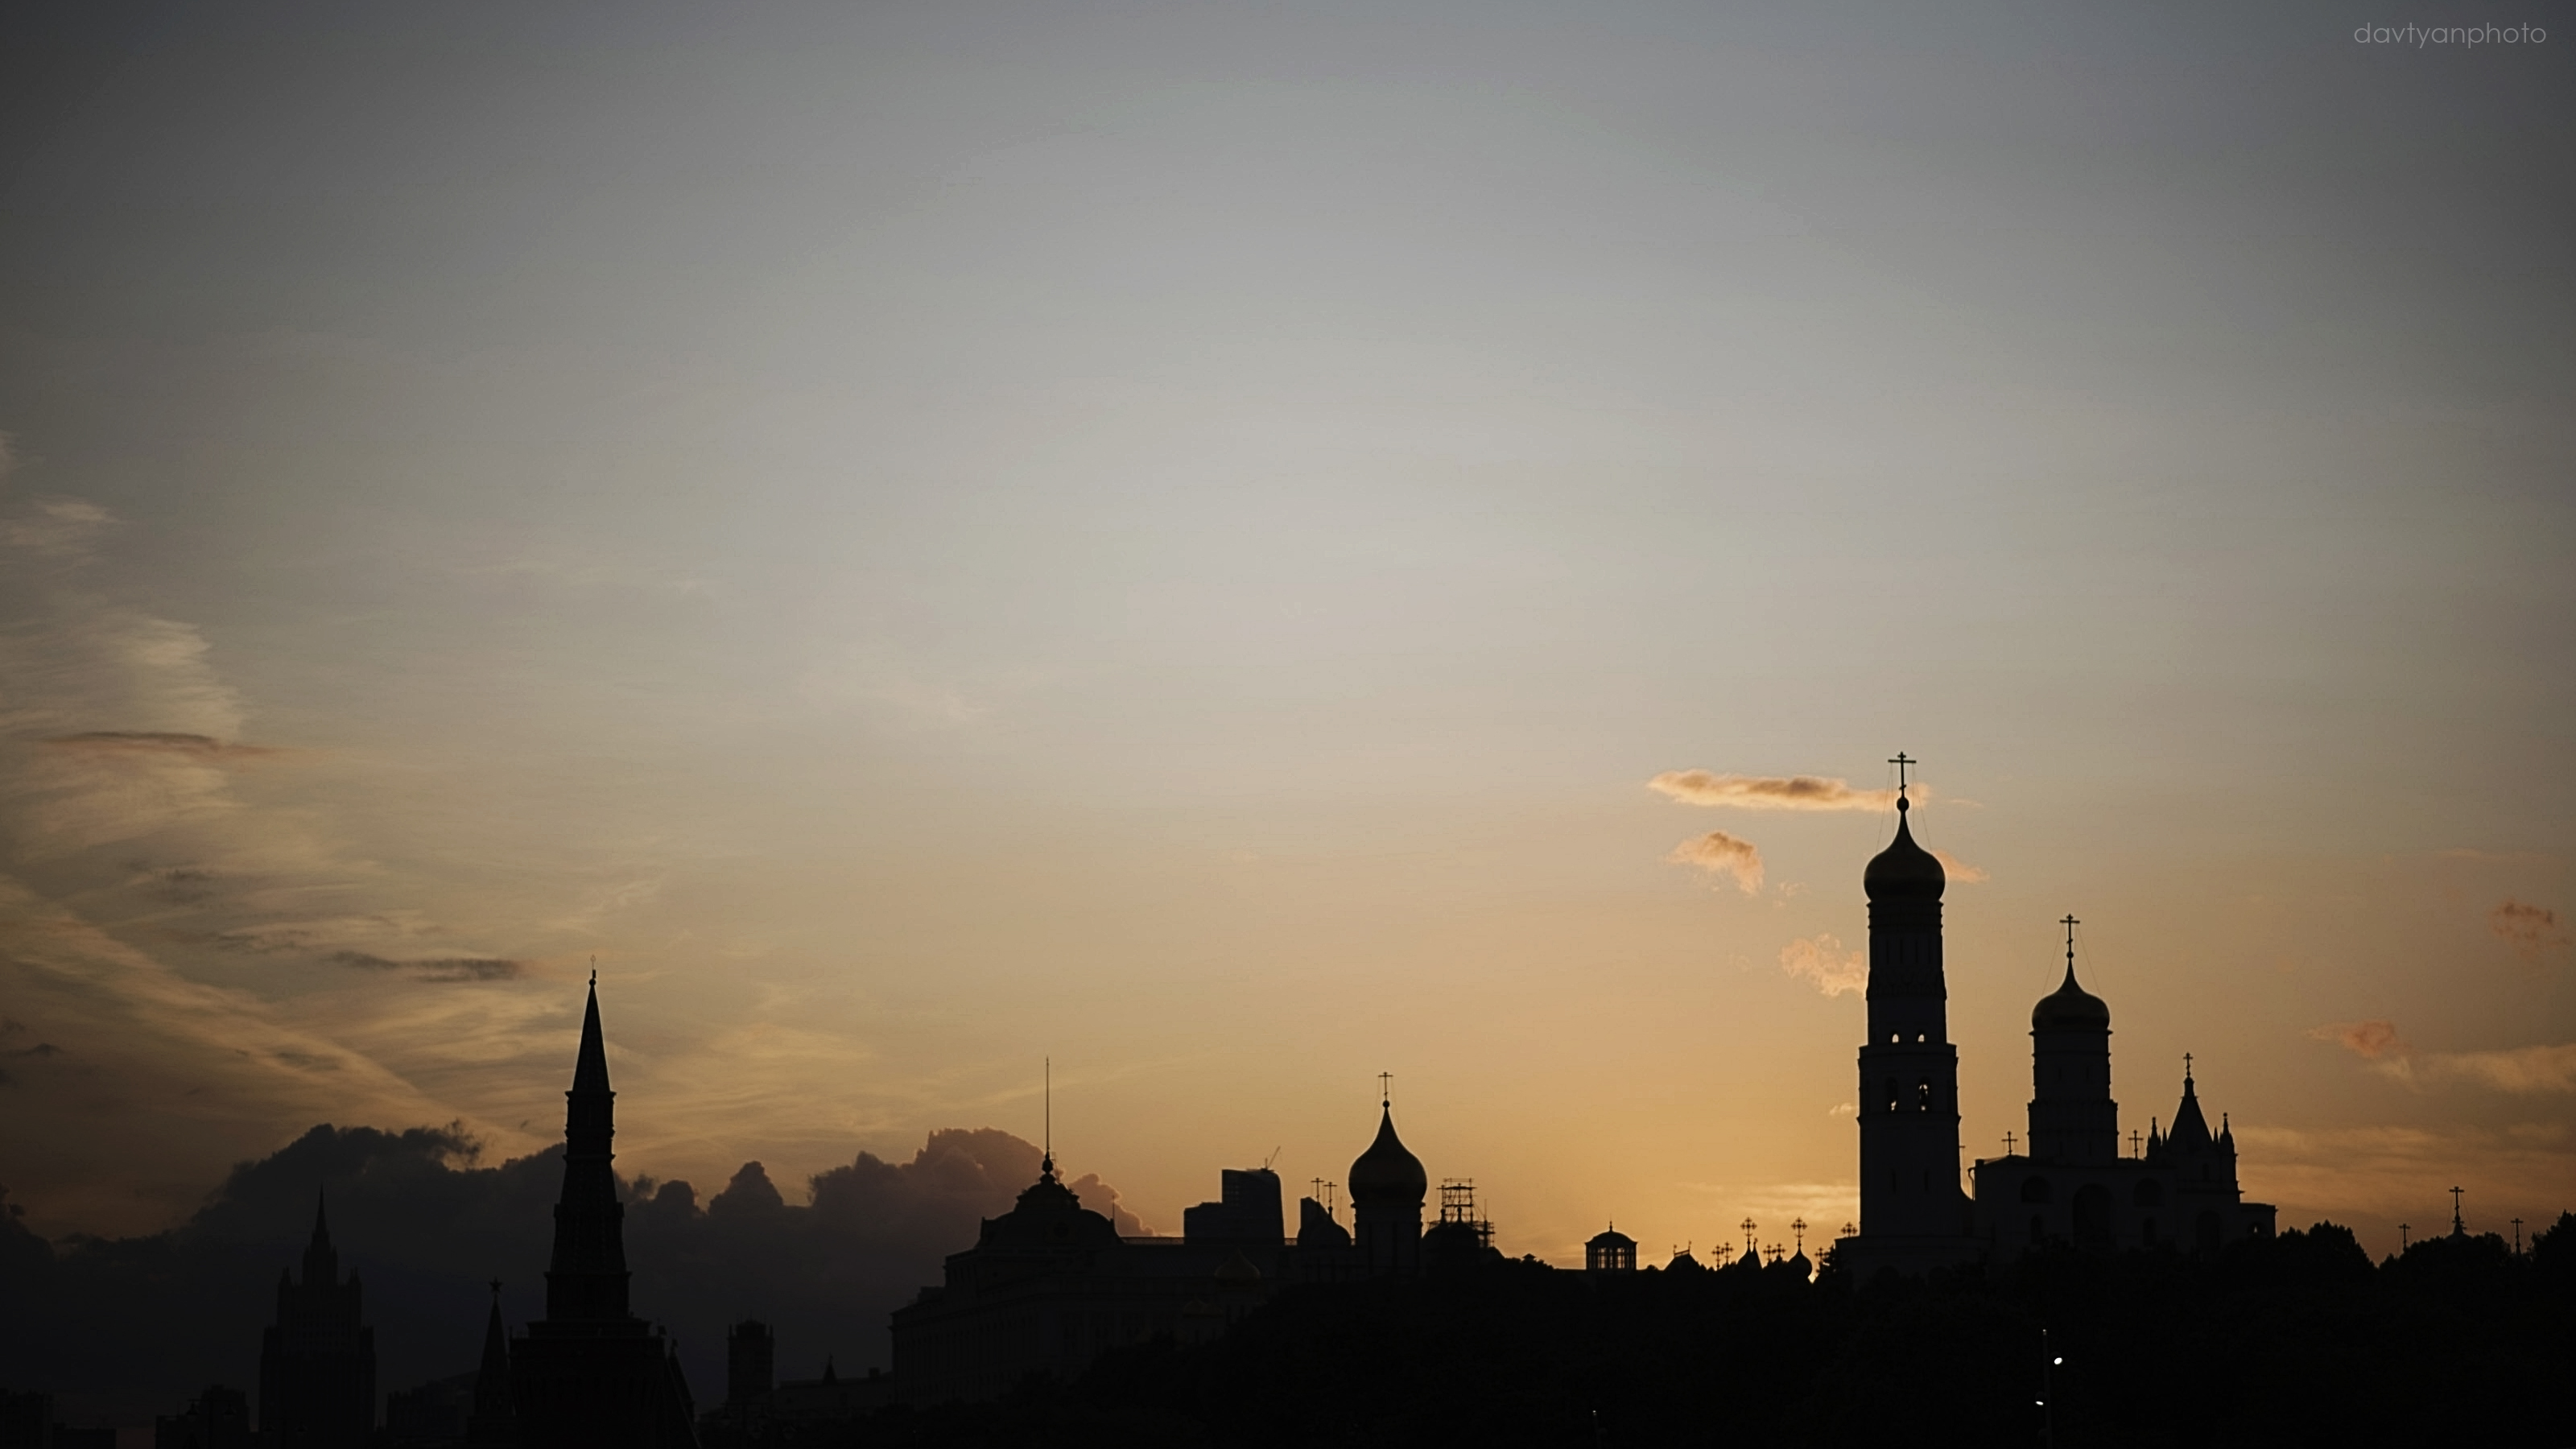 General 3200x1800 city Moscow church sunset landscape silhouette Russia low light Kremlin